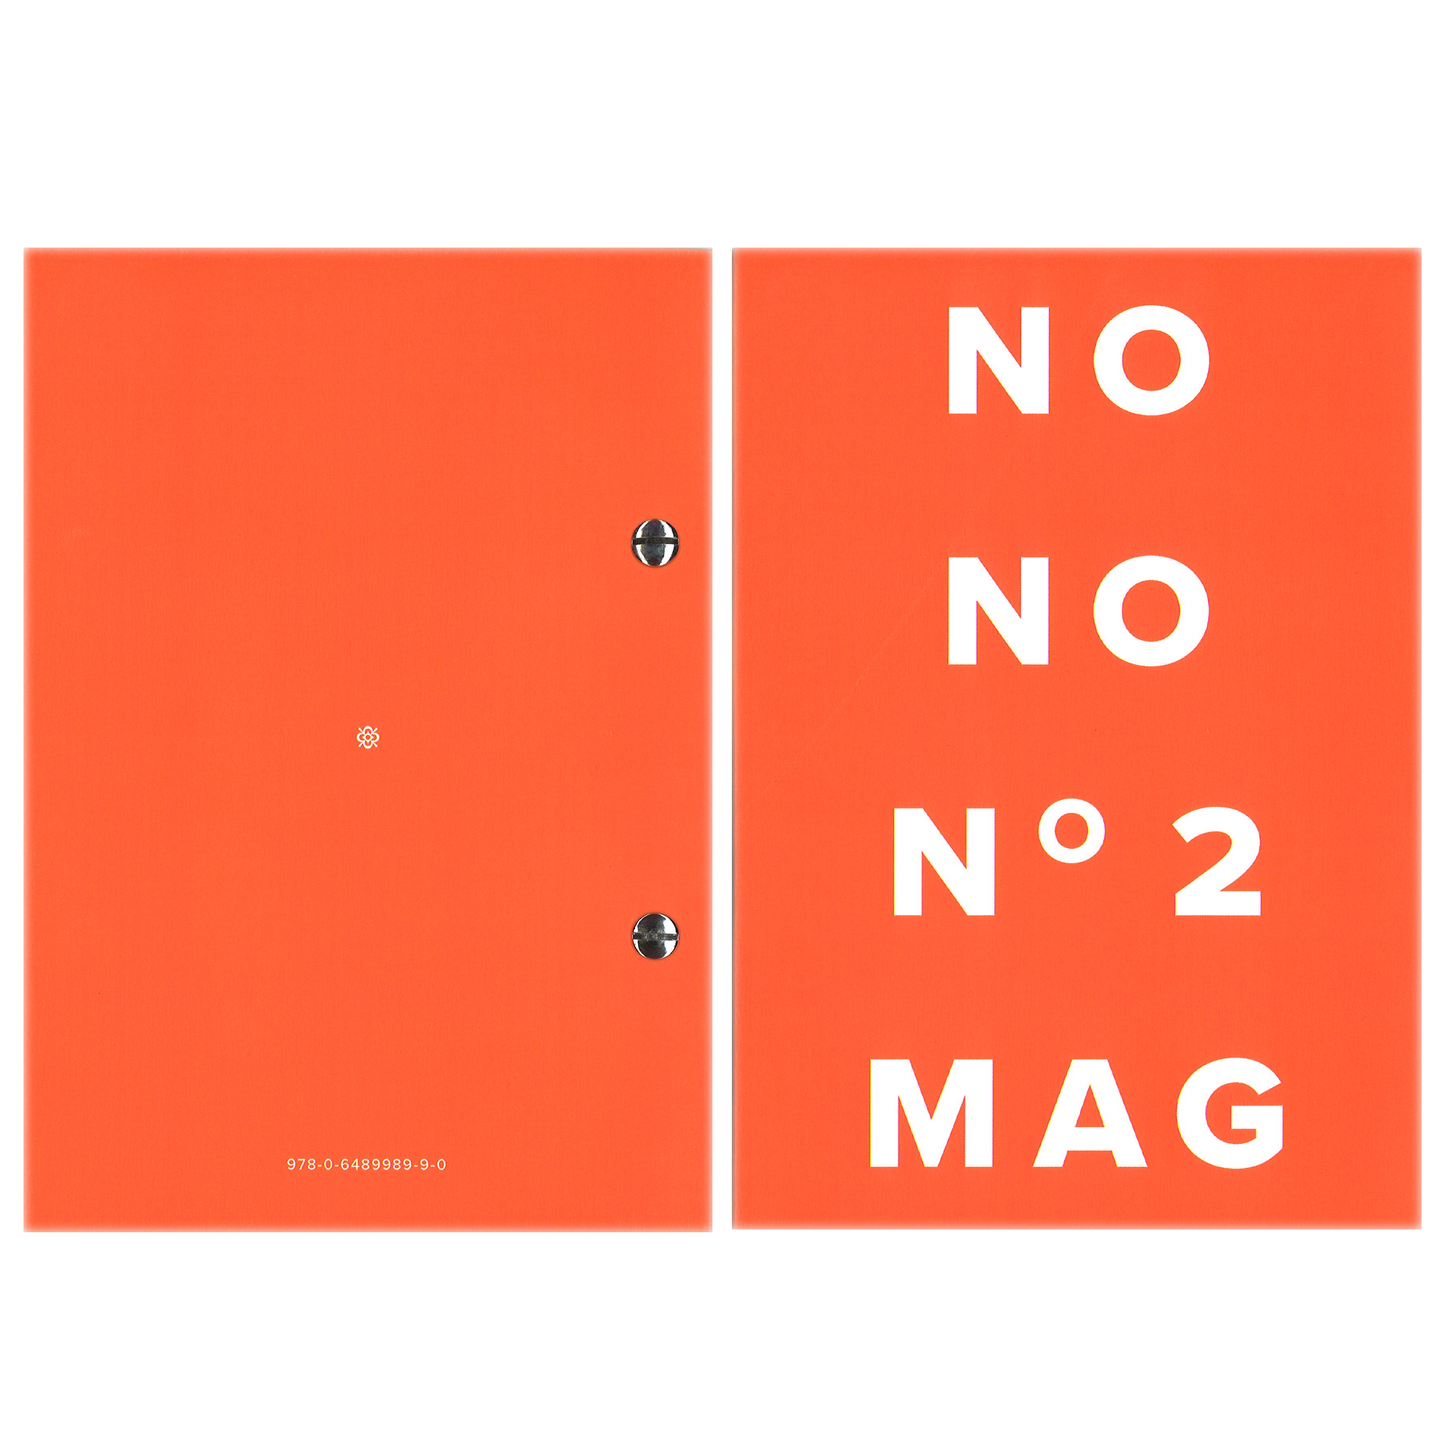 NO NO NO MAG issue two, 2022. English, folio bound (exposed spine, chicago screws), 150 pages — 145 x 205 mm. First edition, edition of 200.